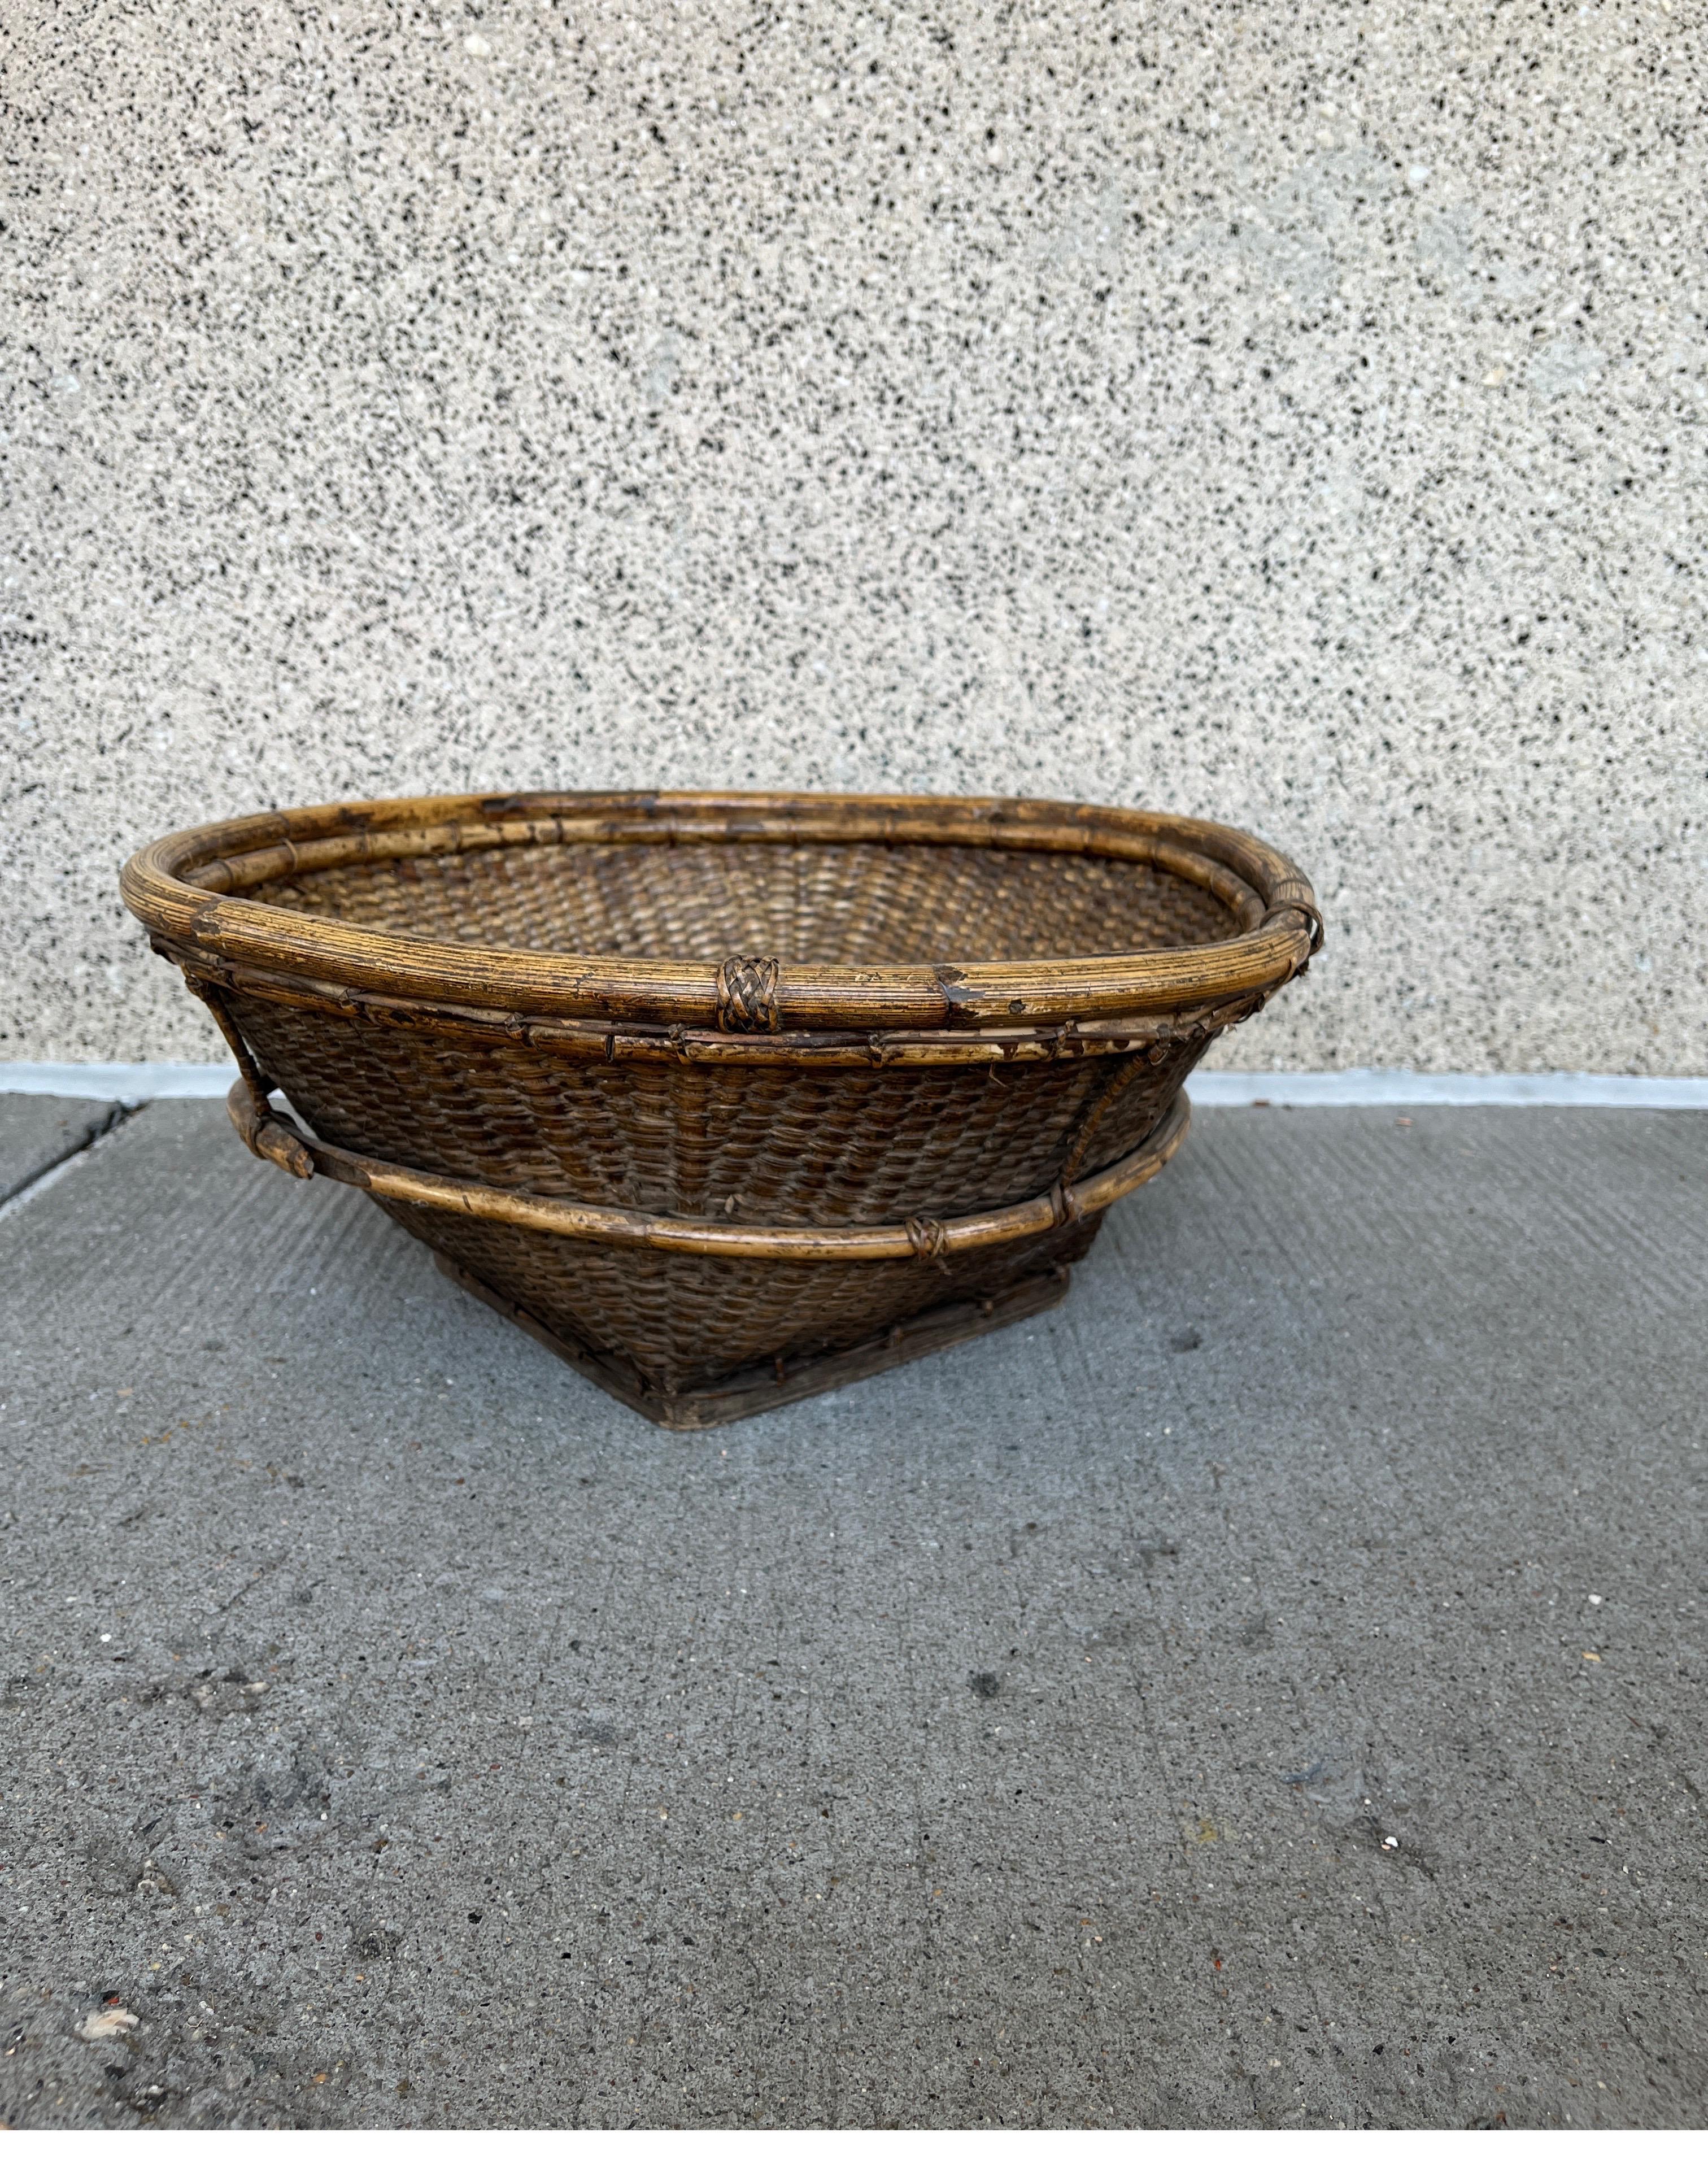 Contemporary Woven Basket, Phillipines 4